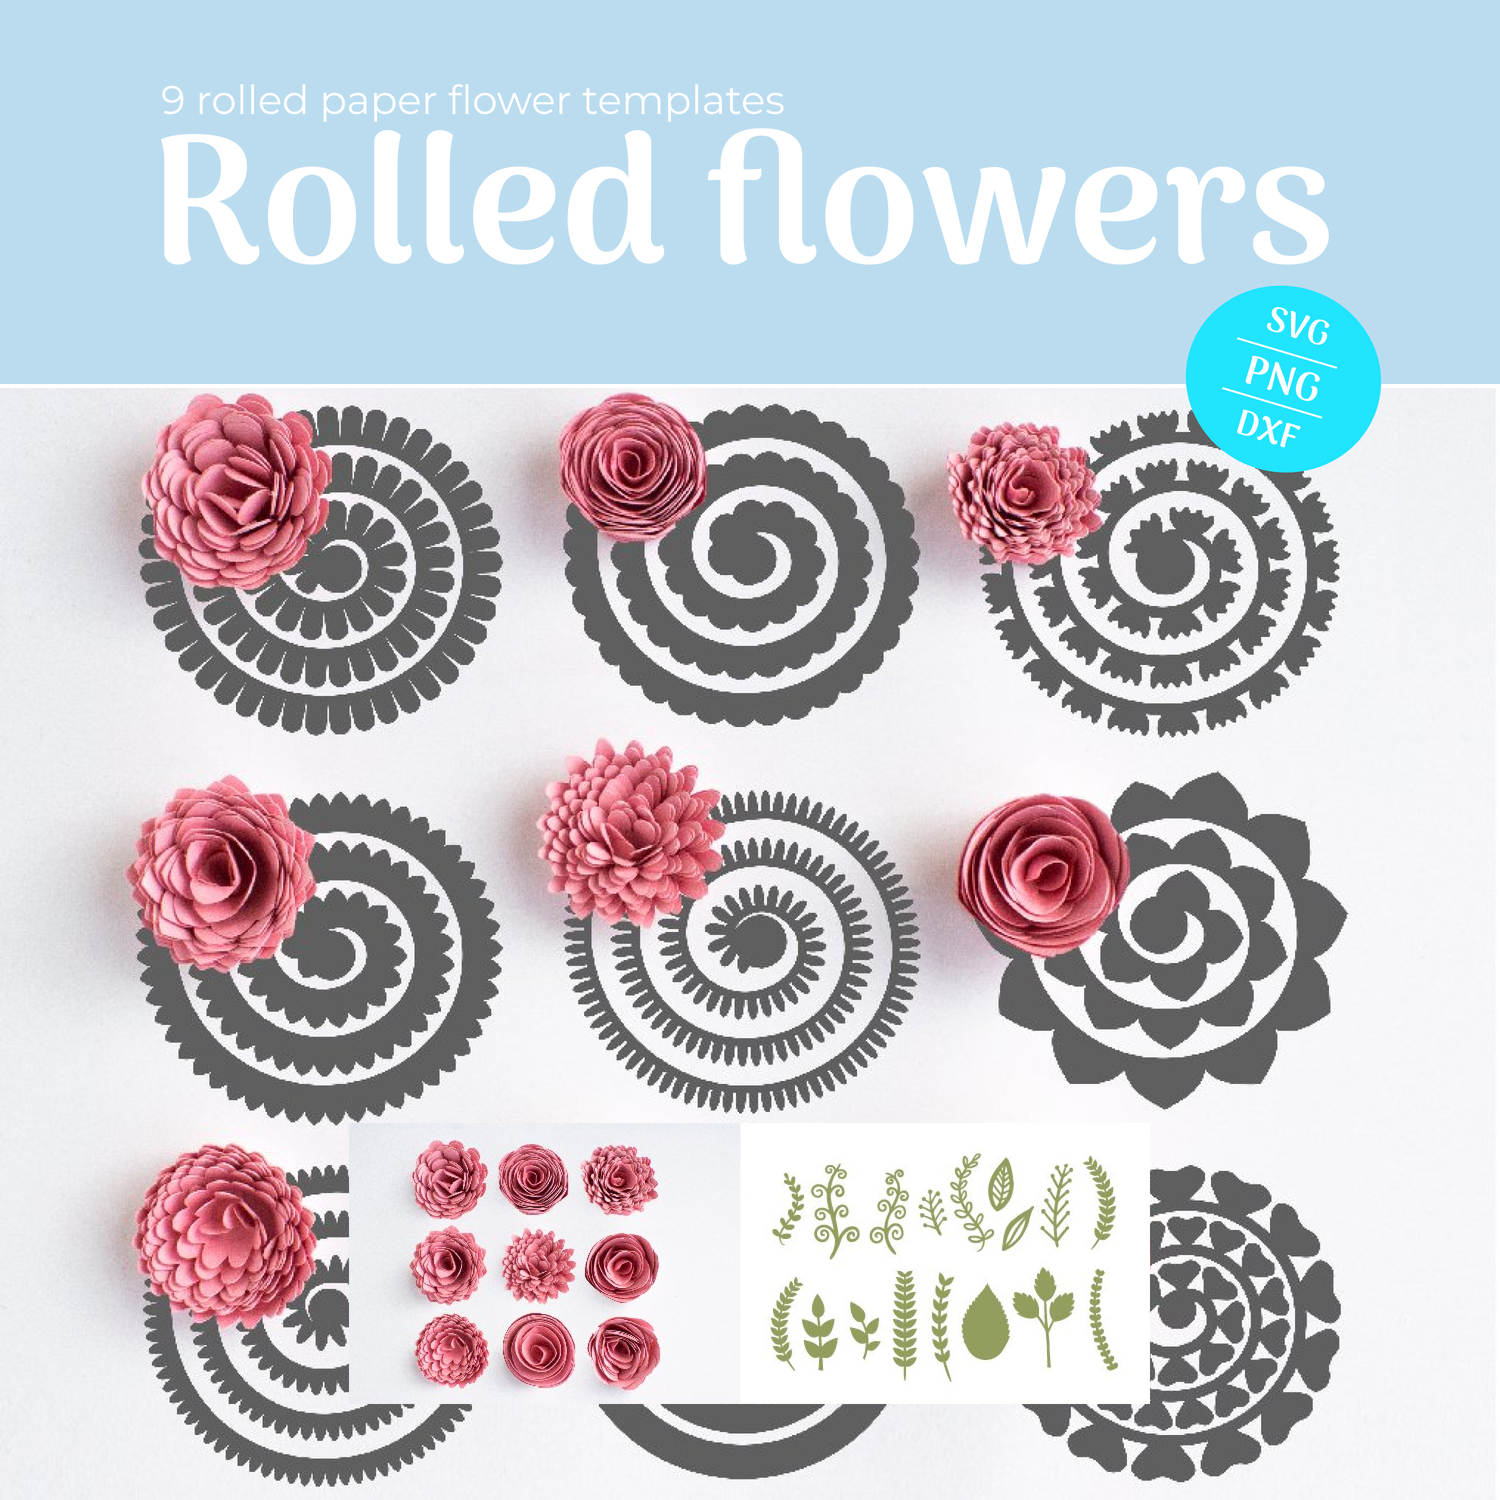 Rolled flowers SVG -9 rolled paper flower templates main cover.